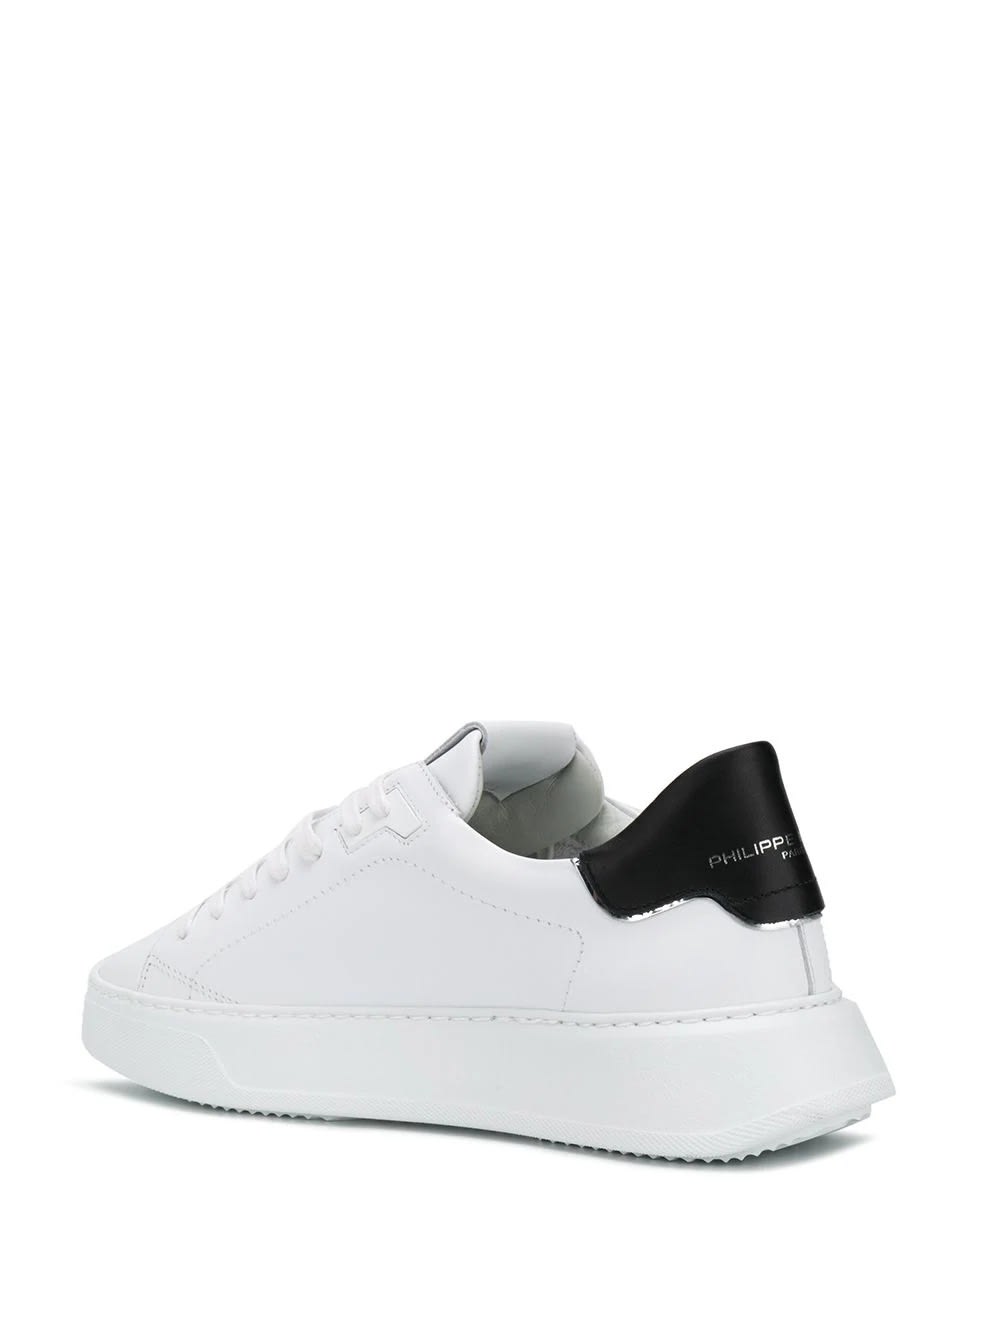 Shop Philippe Model Temple Low Sneakers - White And Black